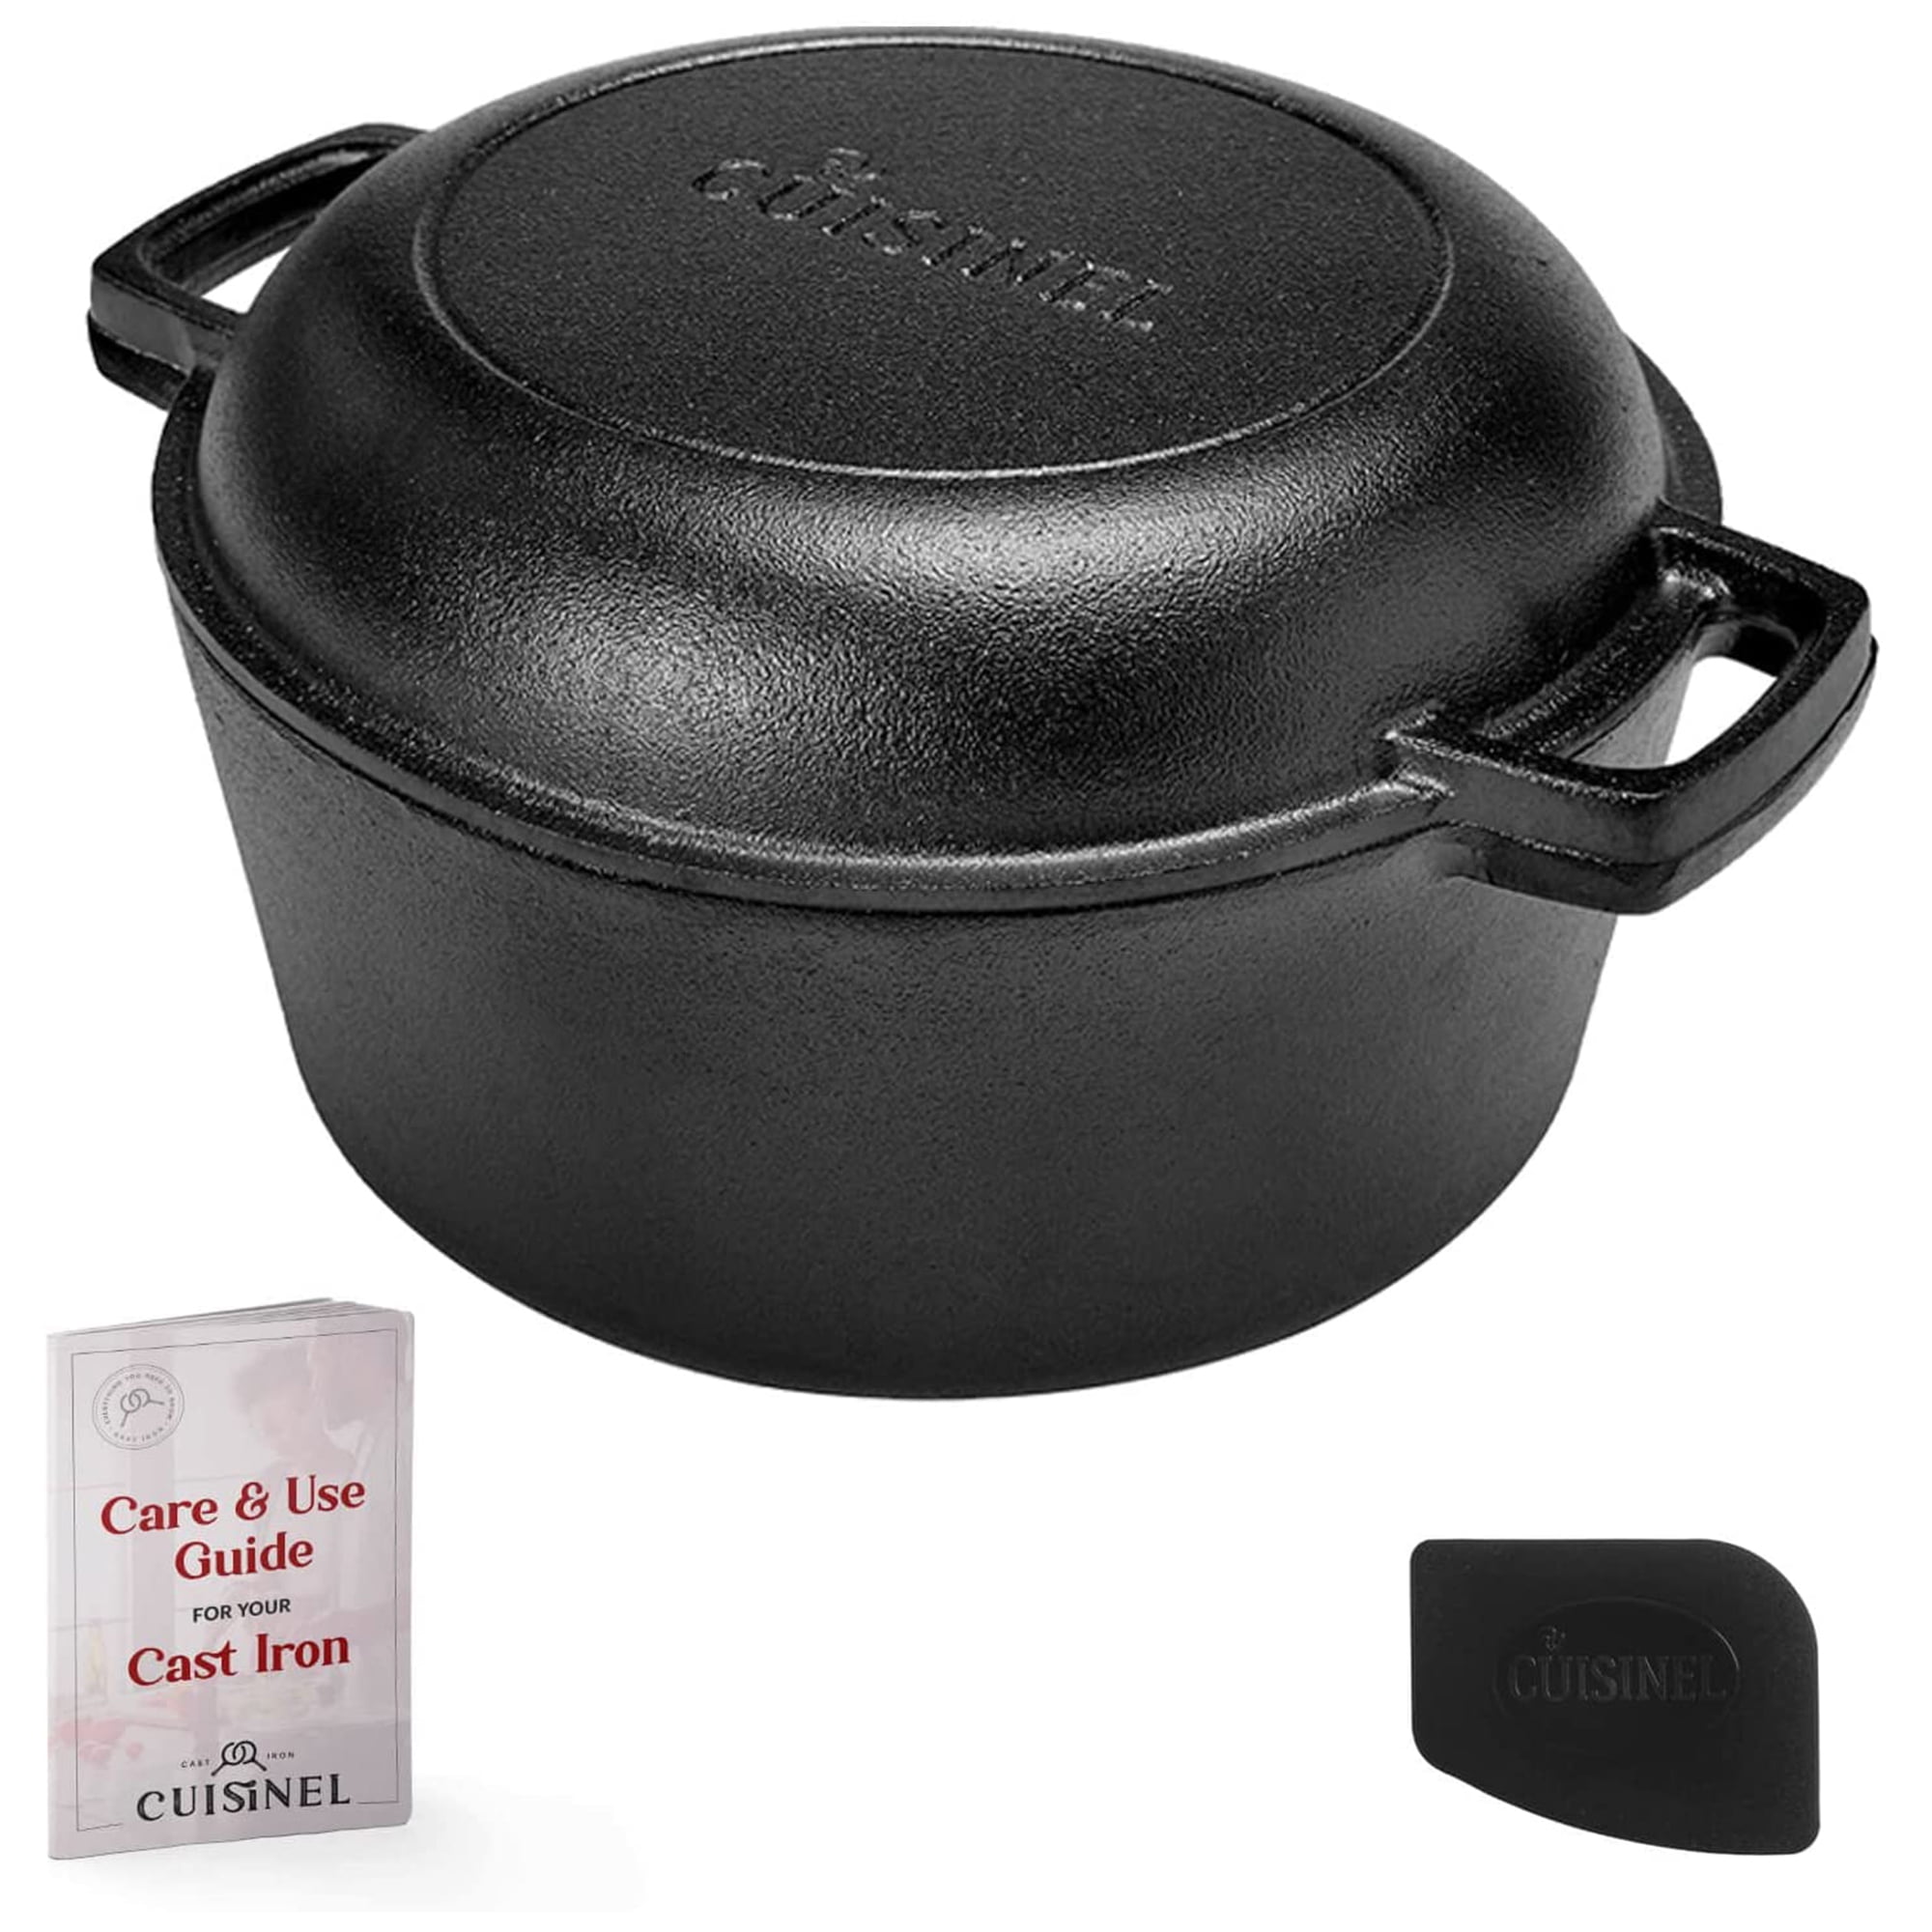 Uno Casa 2in1 Dutch Oven Large - 5 Quart Dutch Oven Pot with Lid, Seasoned  Cast Iron Camping Stove for Bread, Heavy Duty Cast Iron Pot with Frying Pan